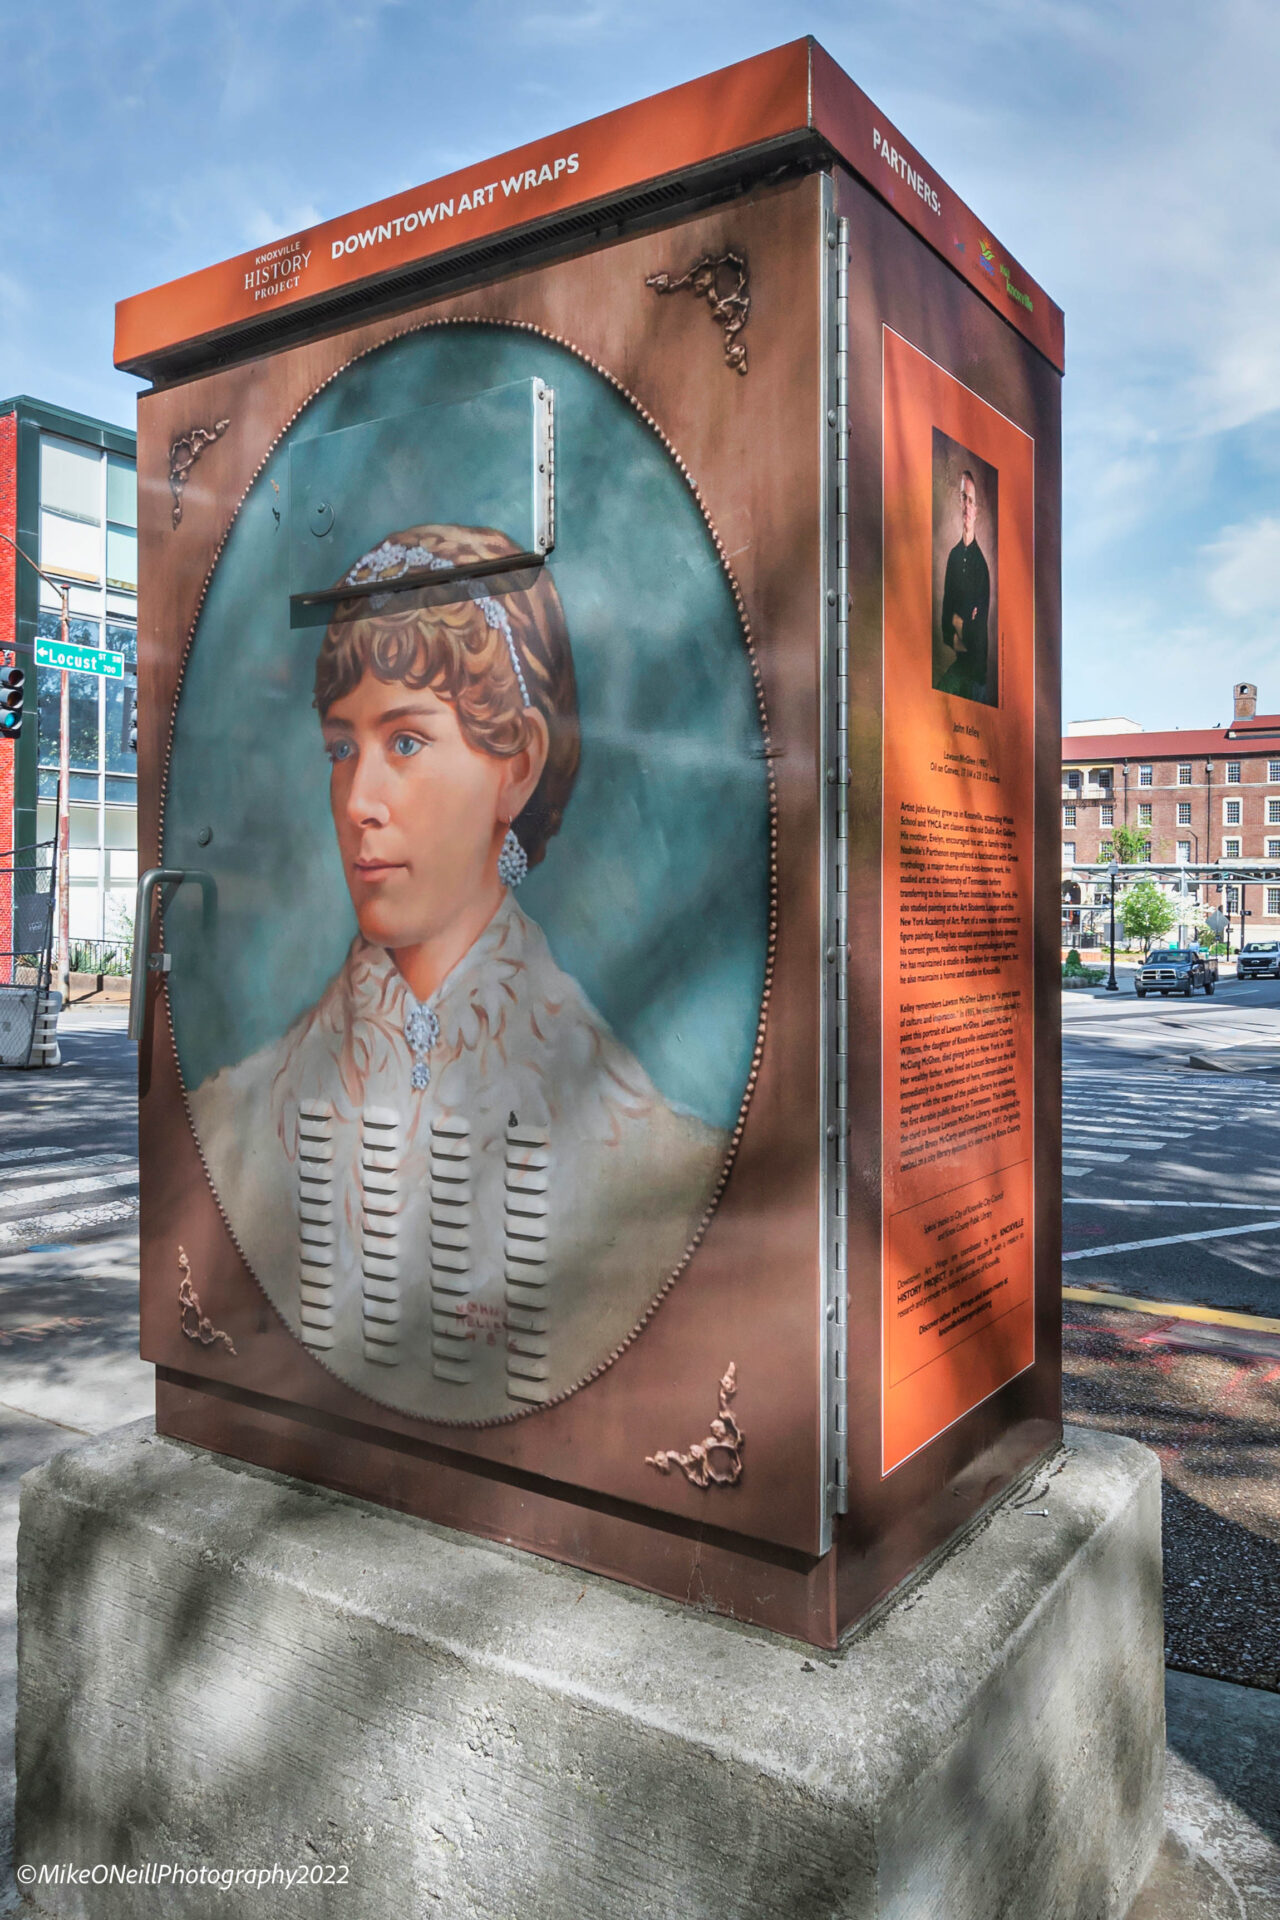 Lawson McGhee by John Kelley at W. Church Avenue and Locust Street. Funded by City Council 202 Funds. Photography by Mike O'Neill.